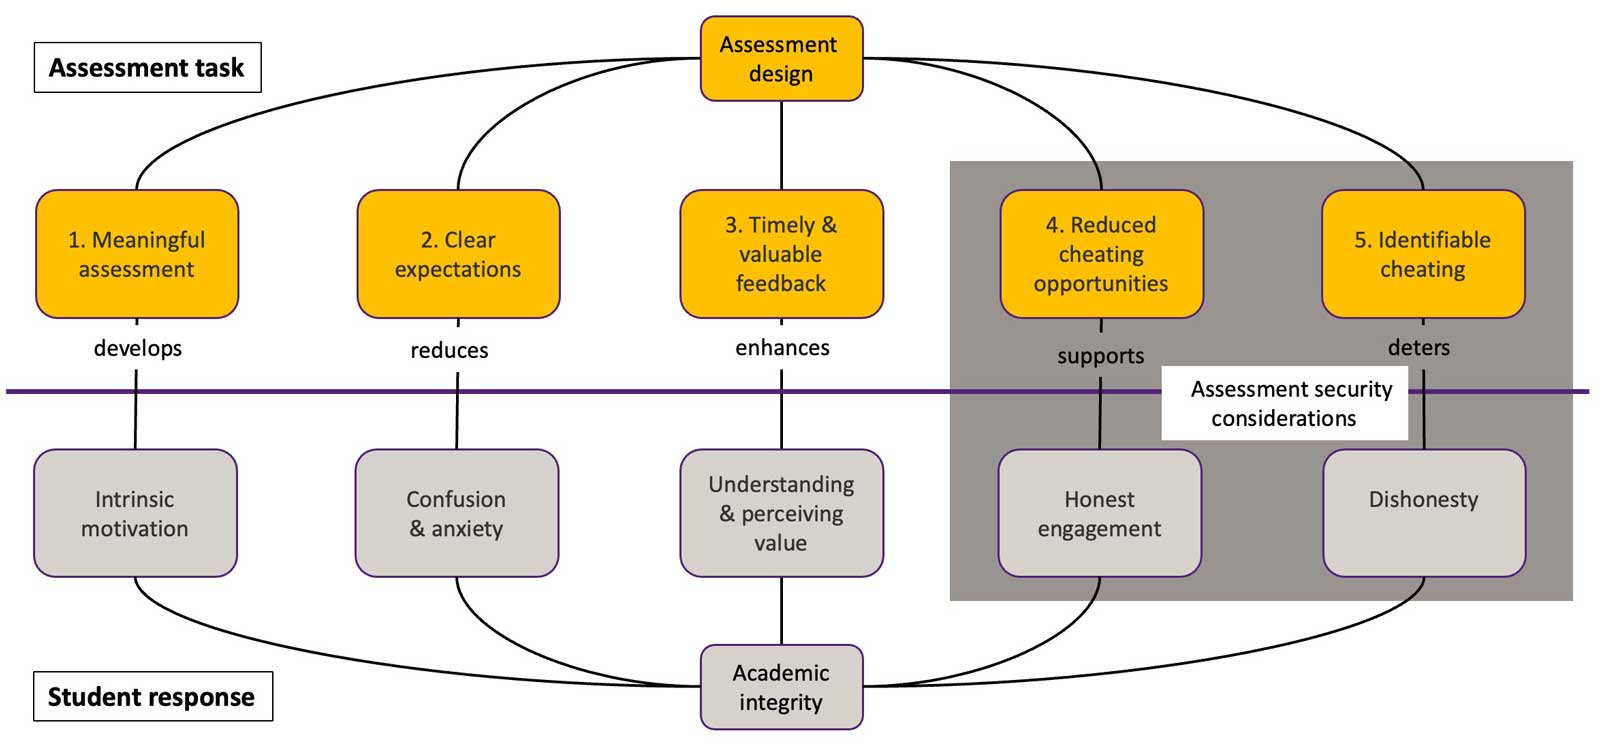 Infographic illustrating the elements of assessment design. Described in text below.